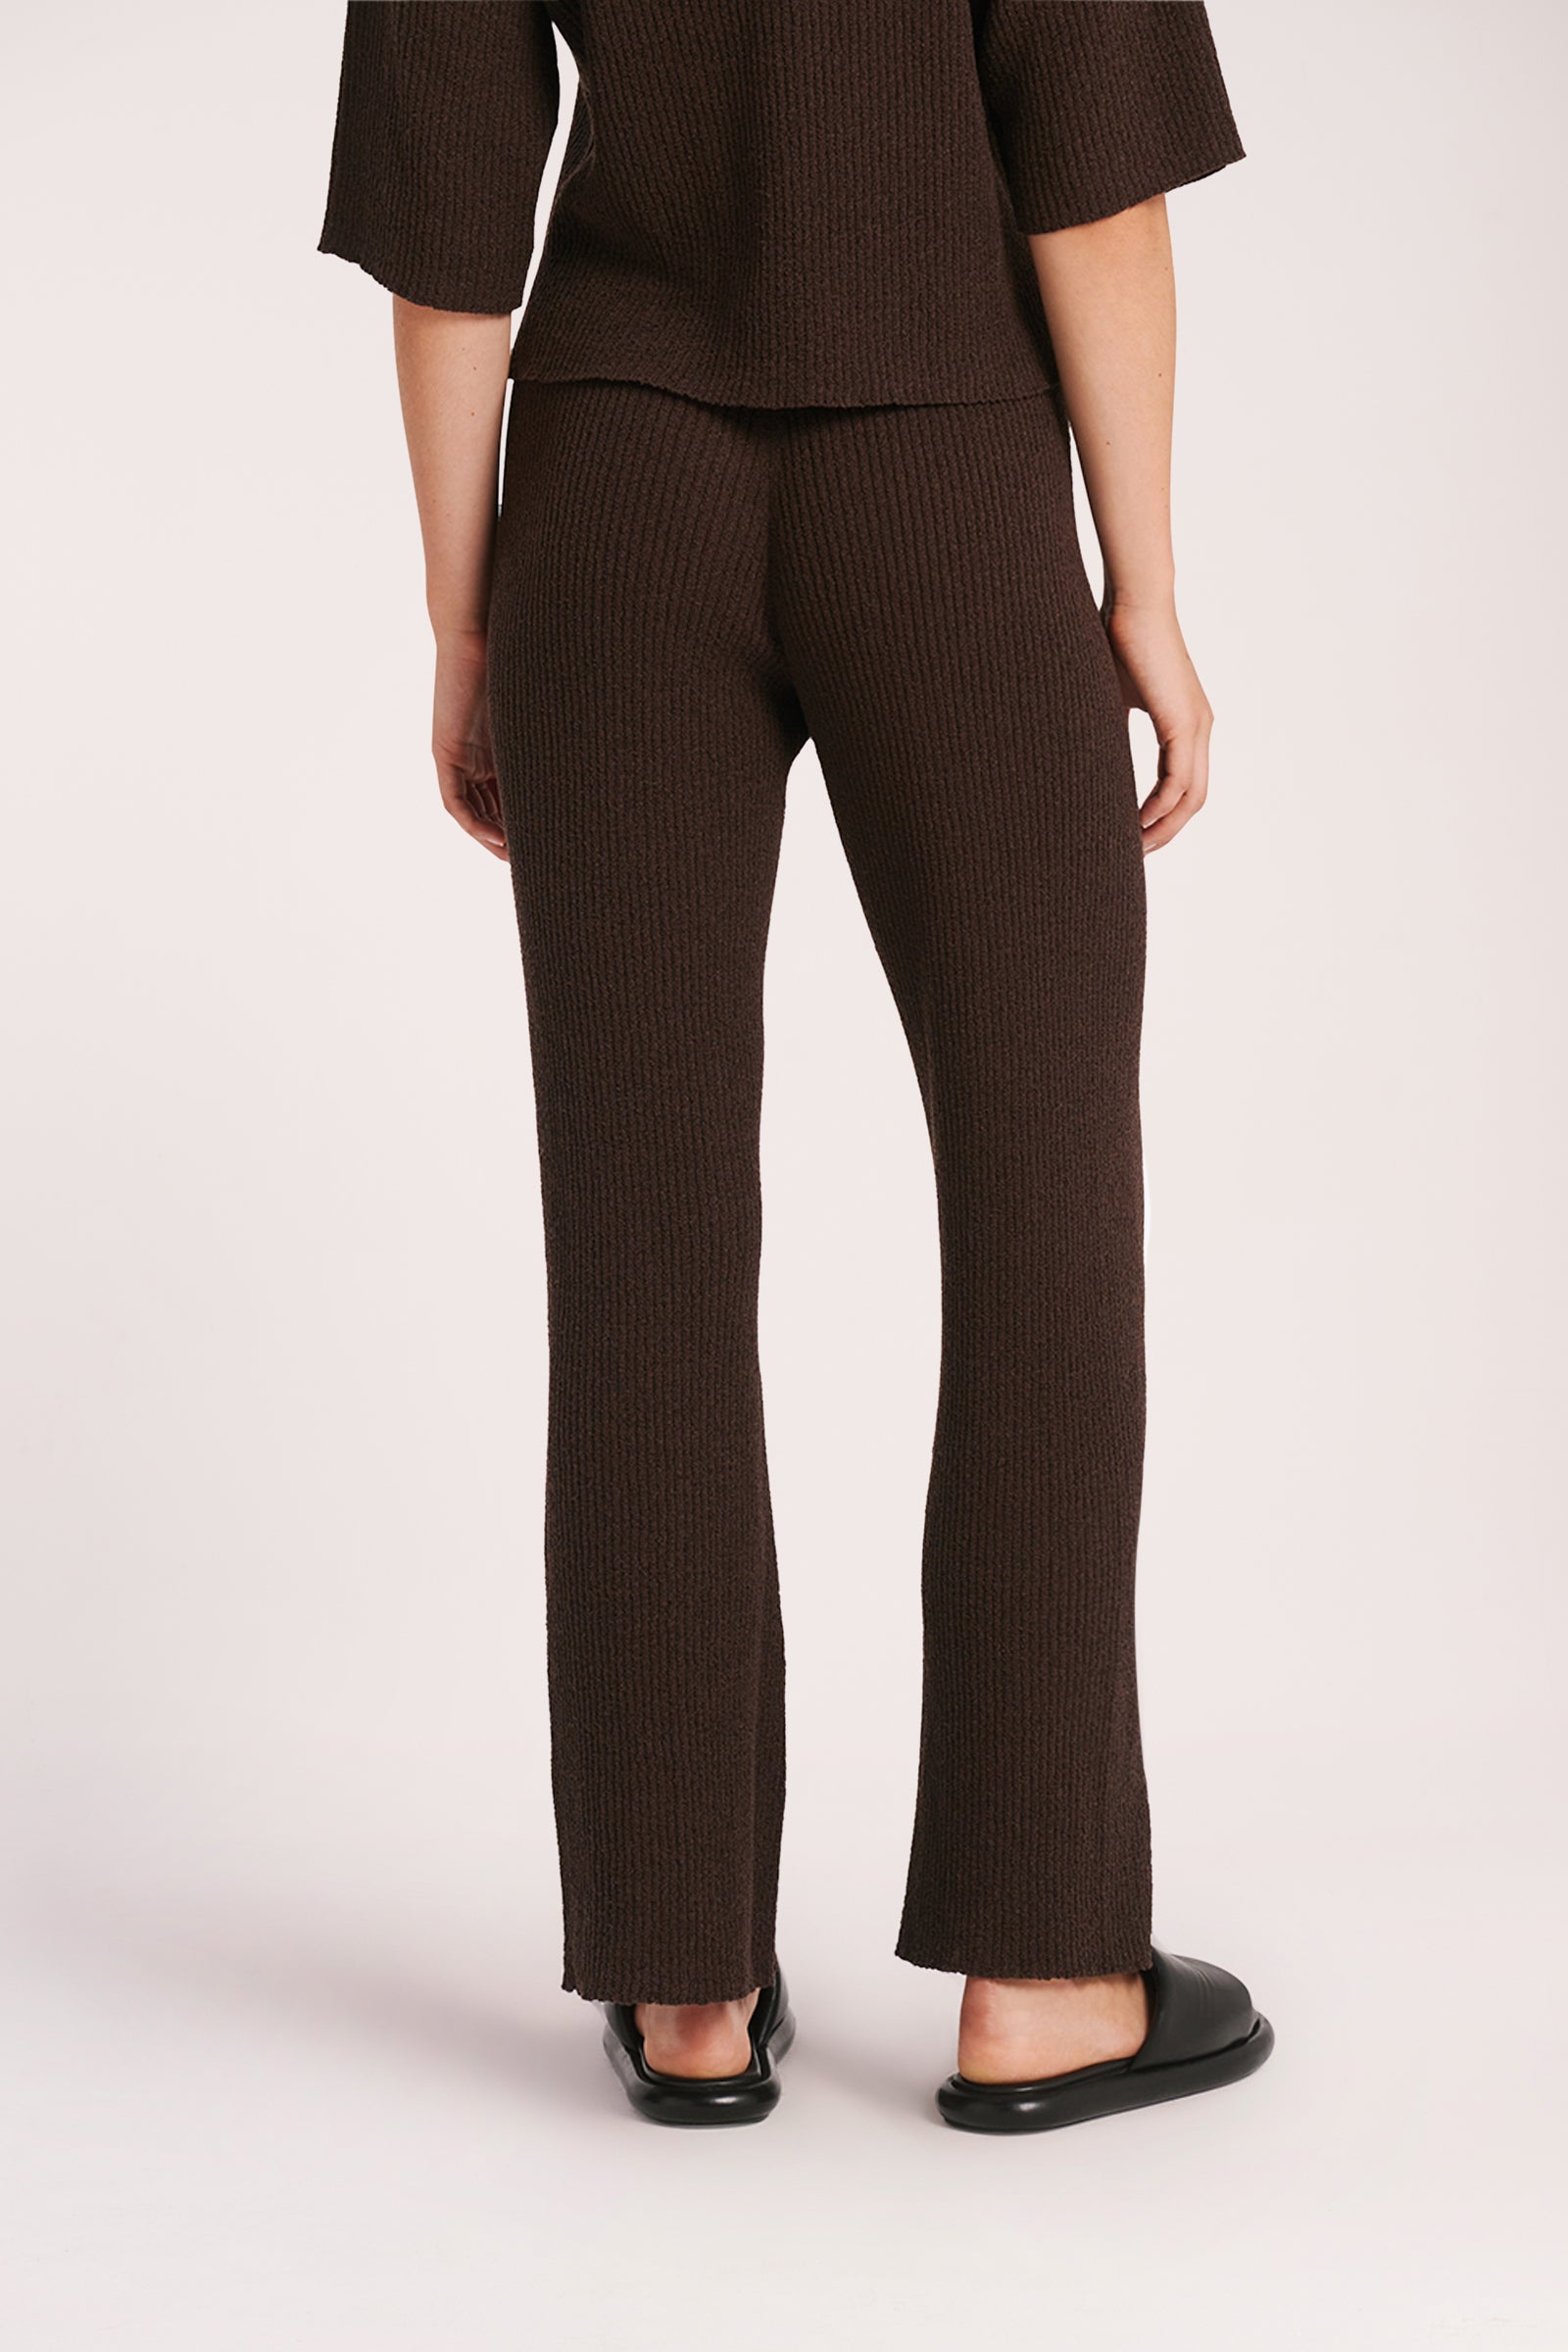 Nude Lucy Dune Knit Pant In A Brown Cinder Colour